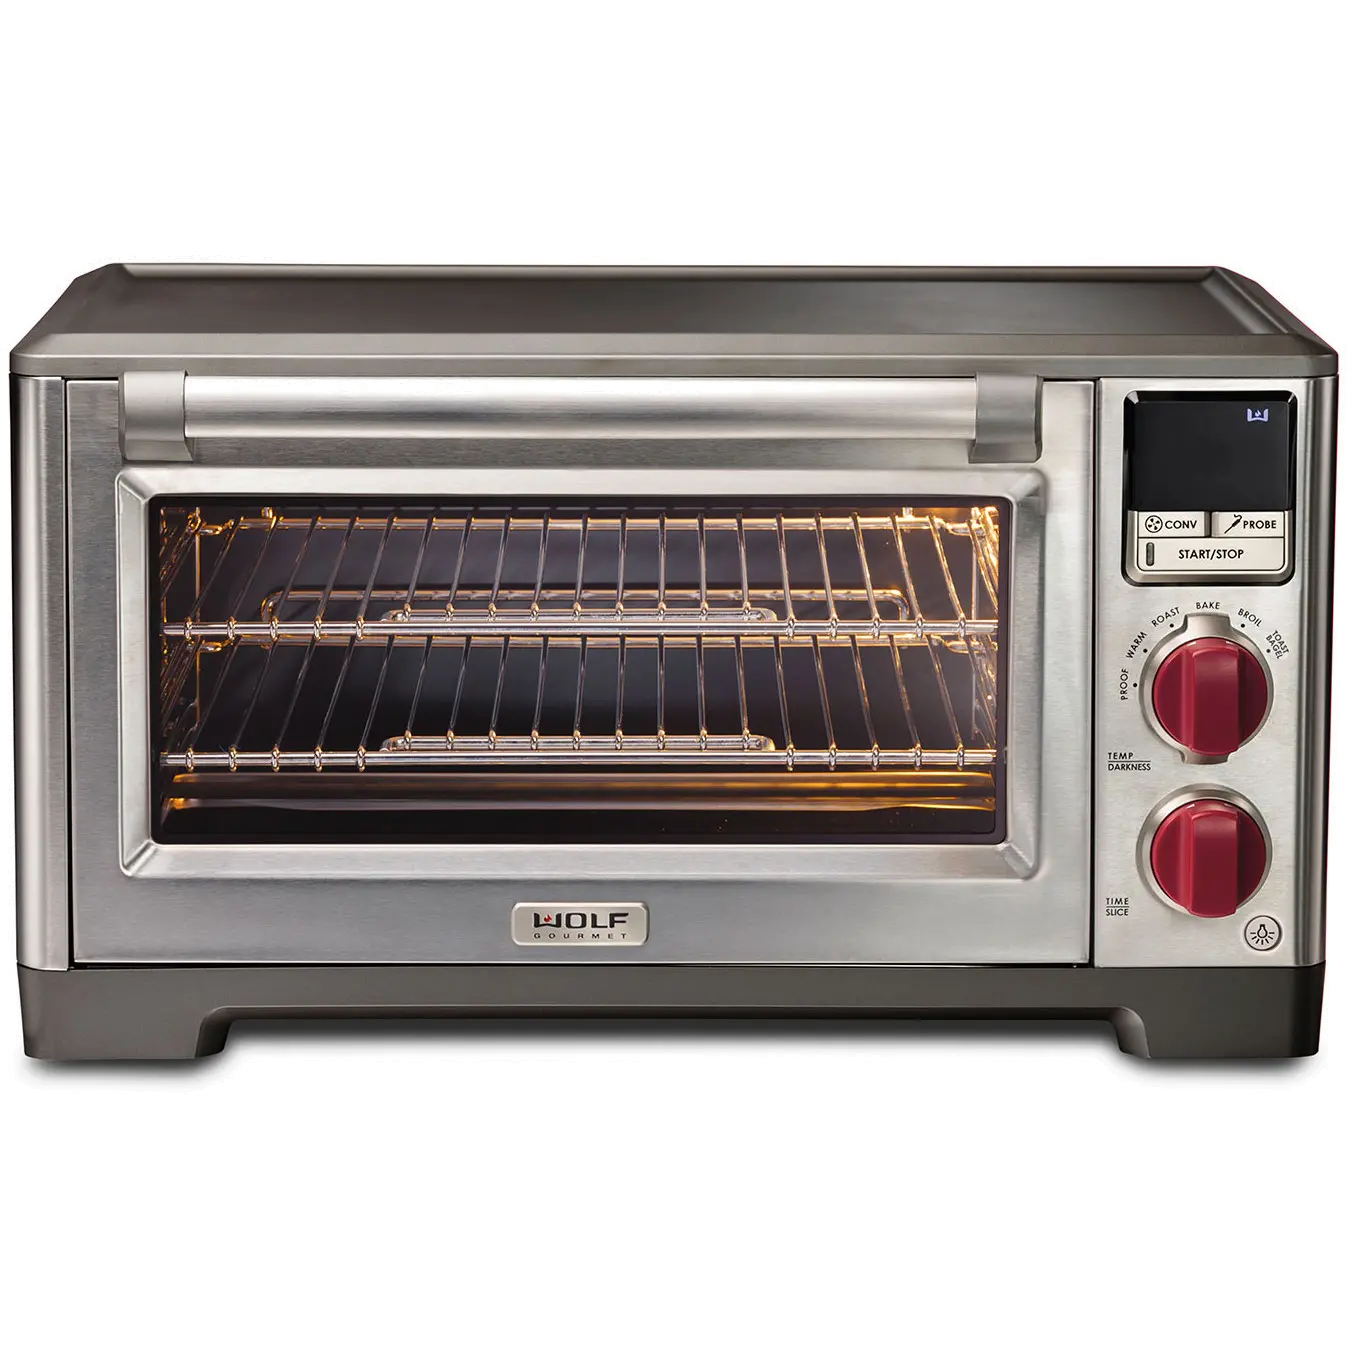 WGCO150S Wolf Gourmet Elite Countertop Oven with Convection - Stainless Steel-1